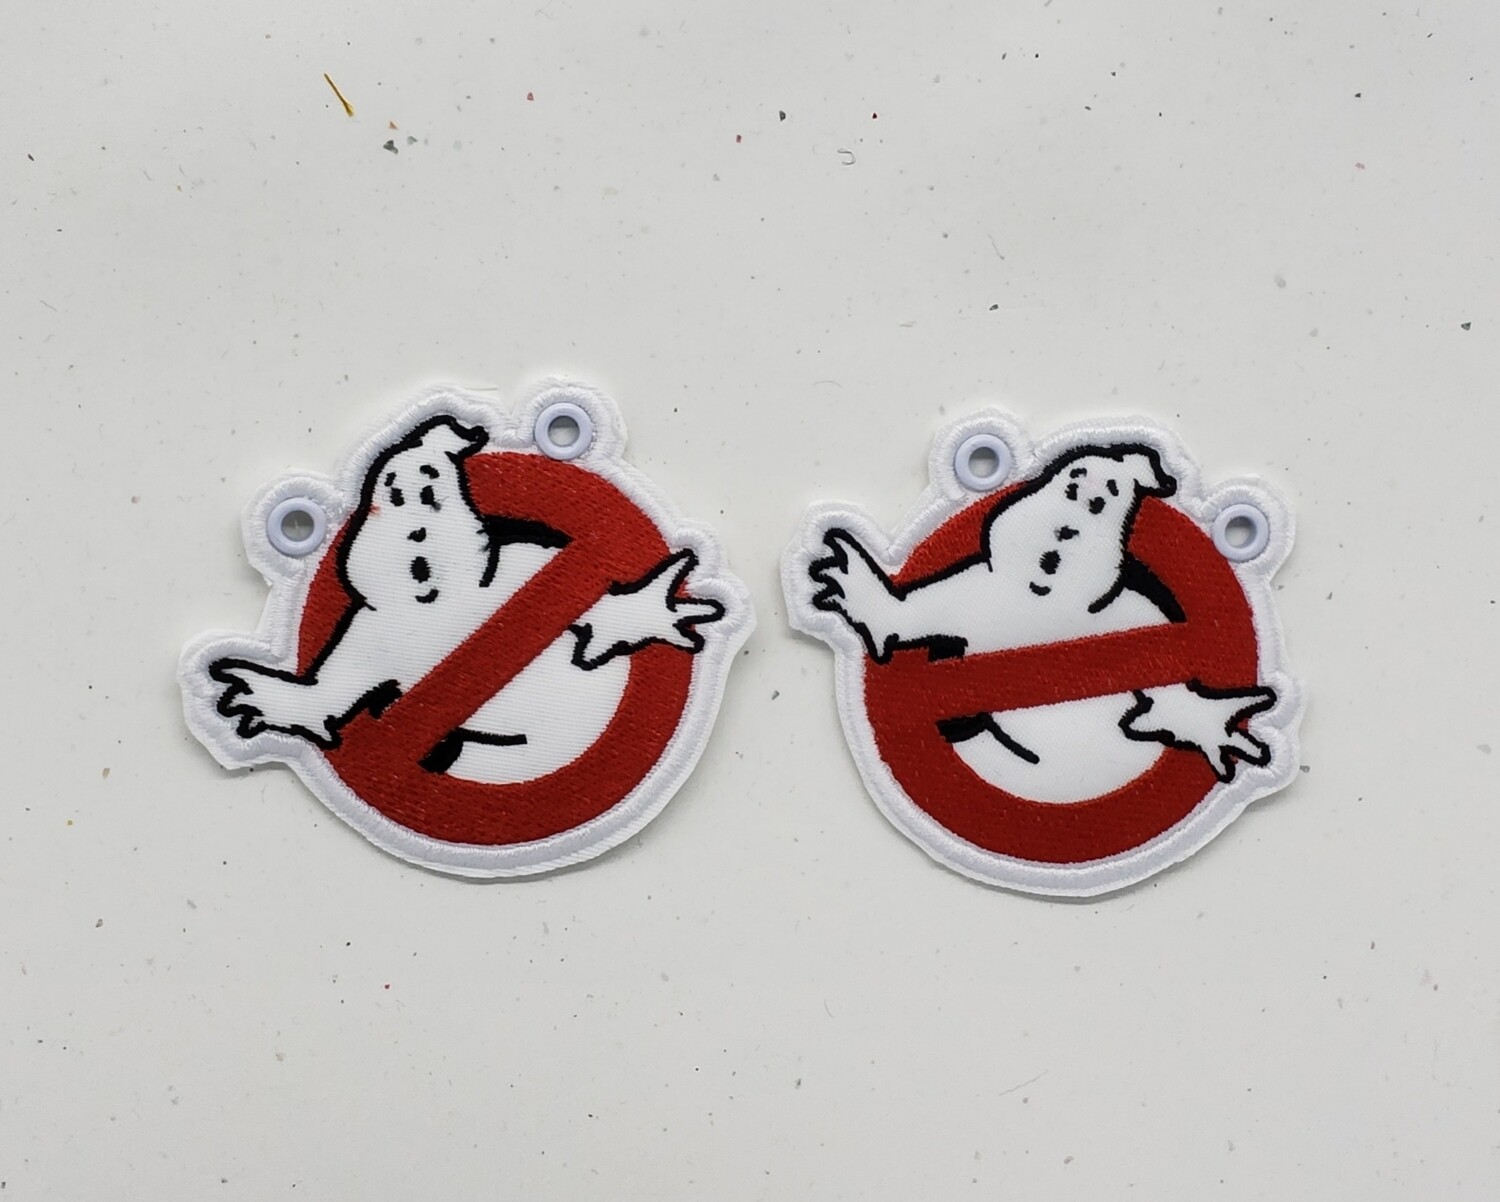 Ghostbusters lace accessories